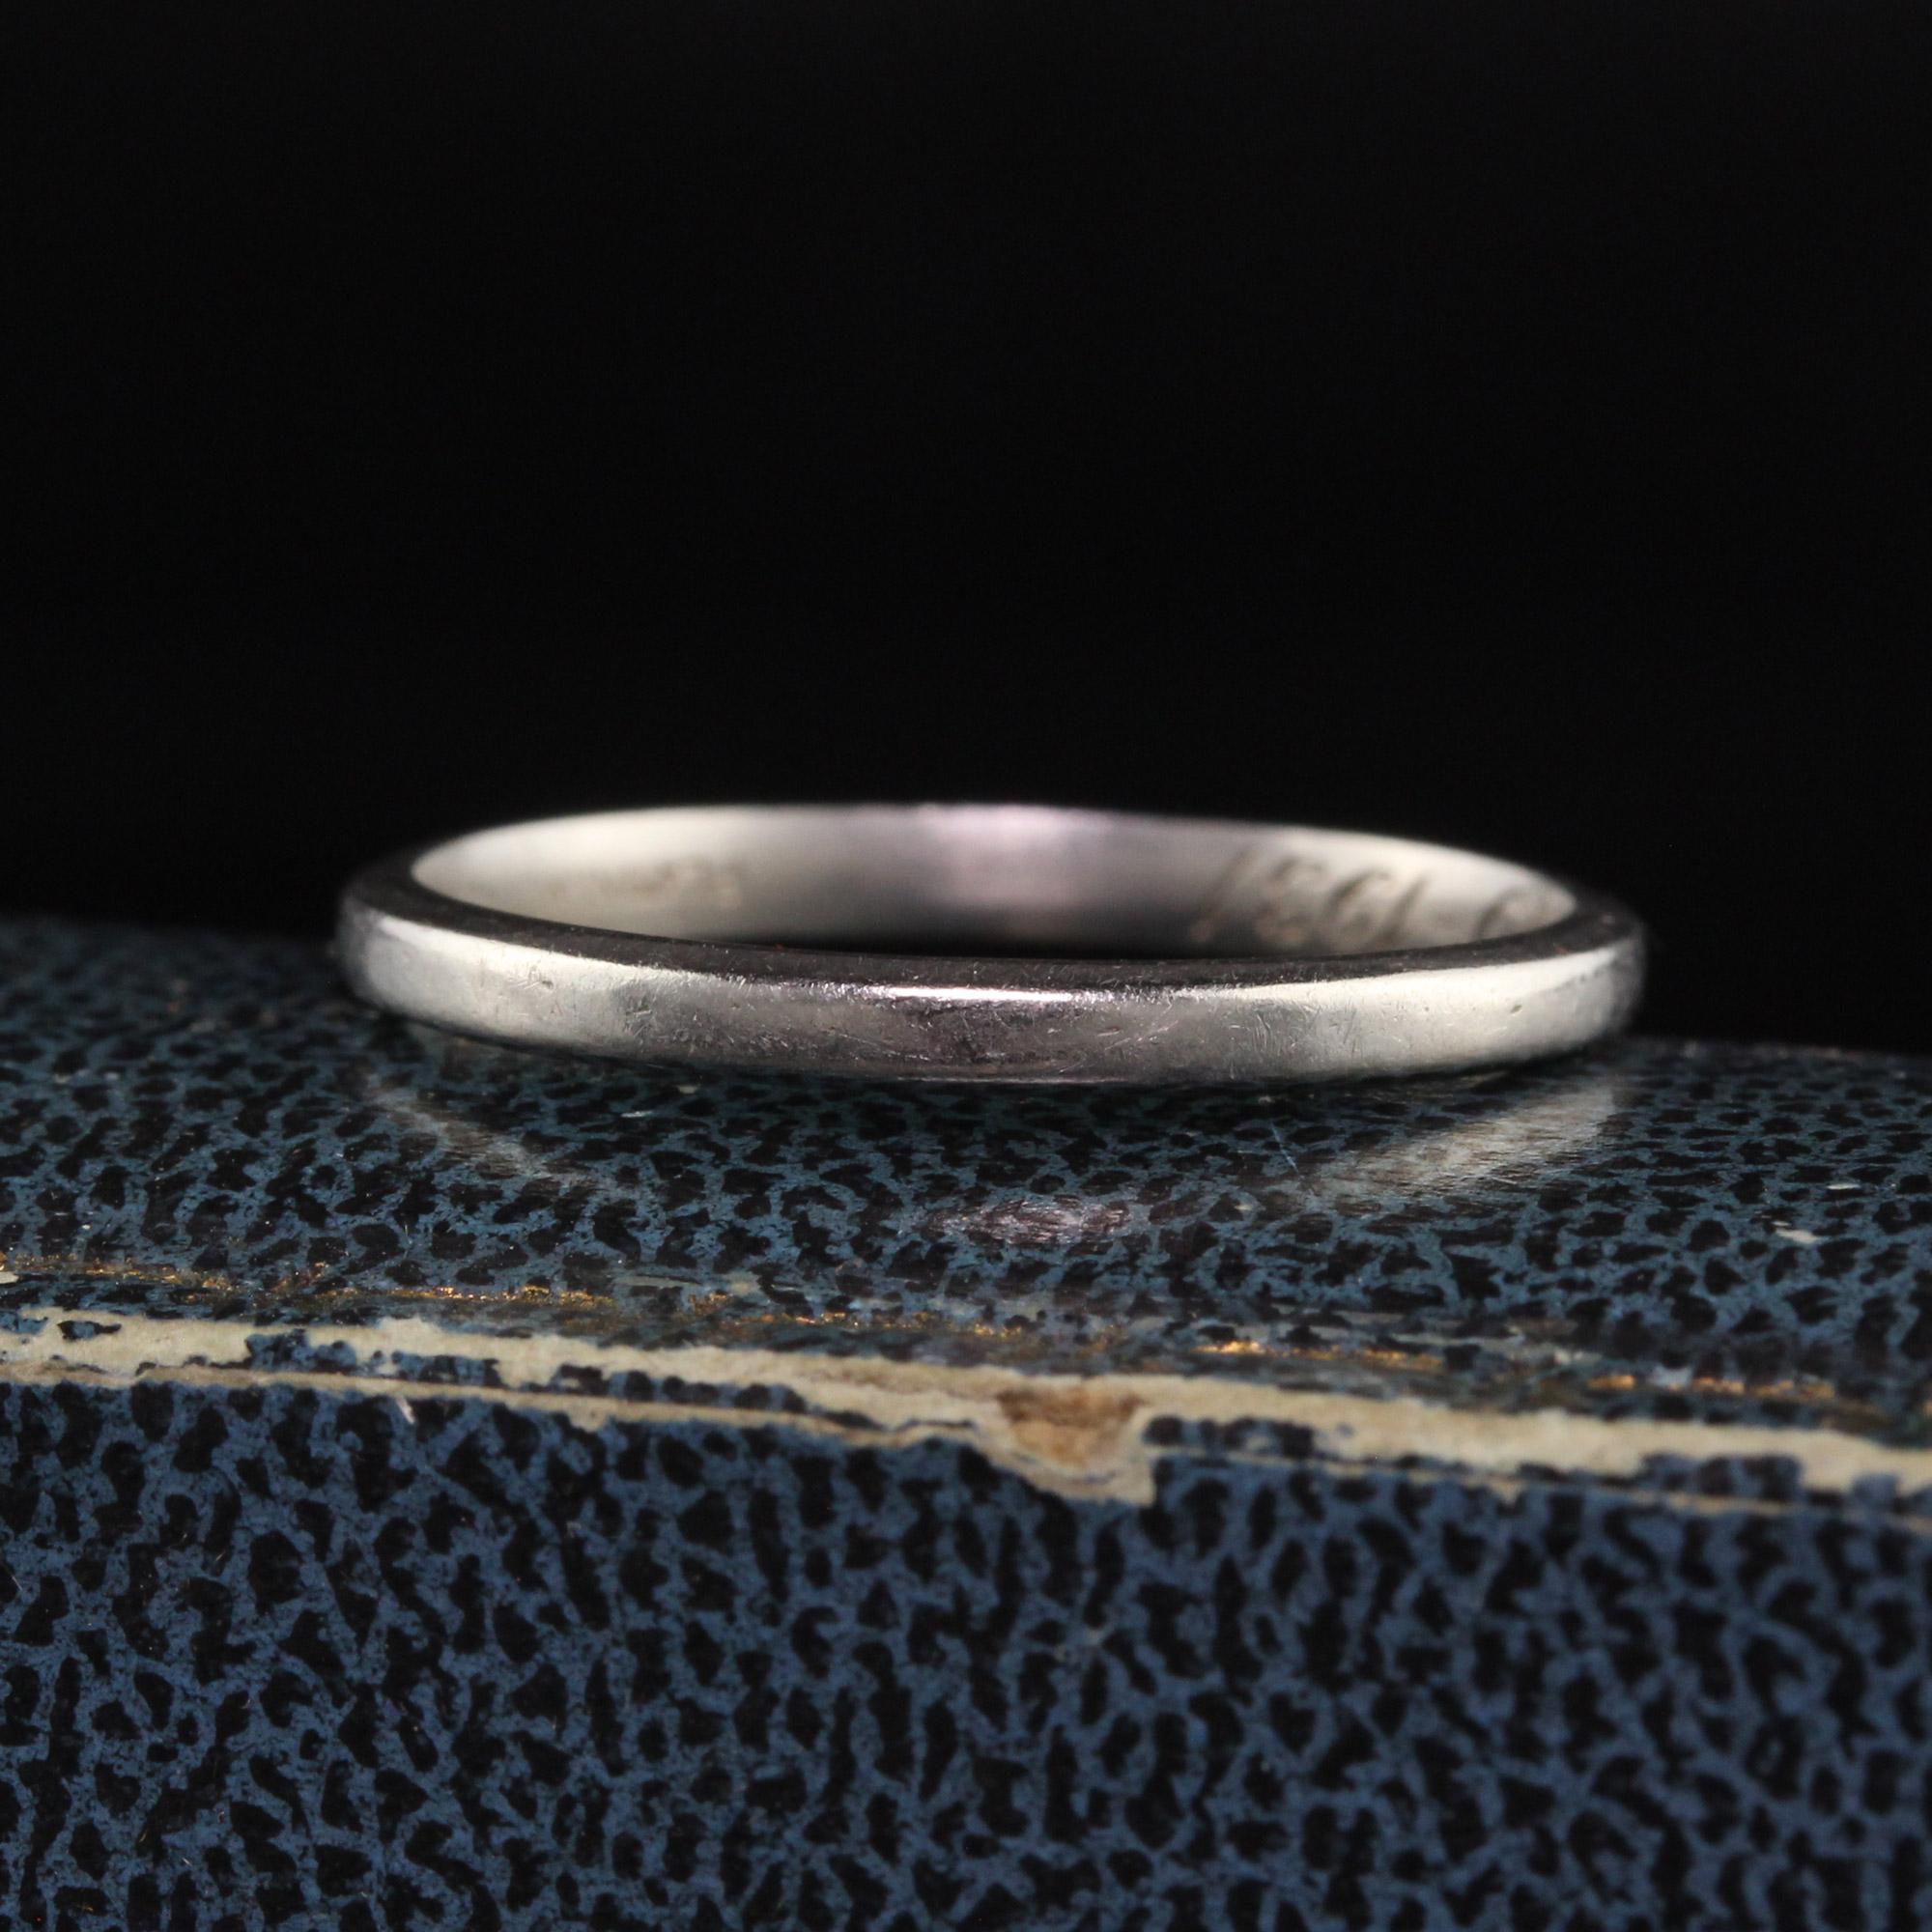 Beautiful Antique Art Deco Platinum Engraved Classic Wedding Band. This classic wedding band is in great condition and has G. E. N To F. E. Y. Nov 19 - 1931